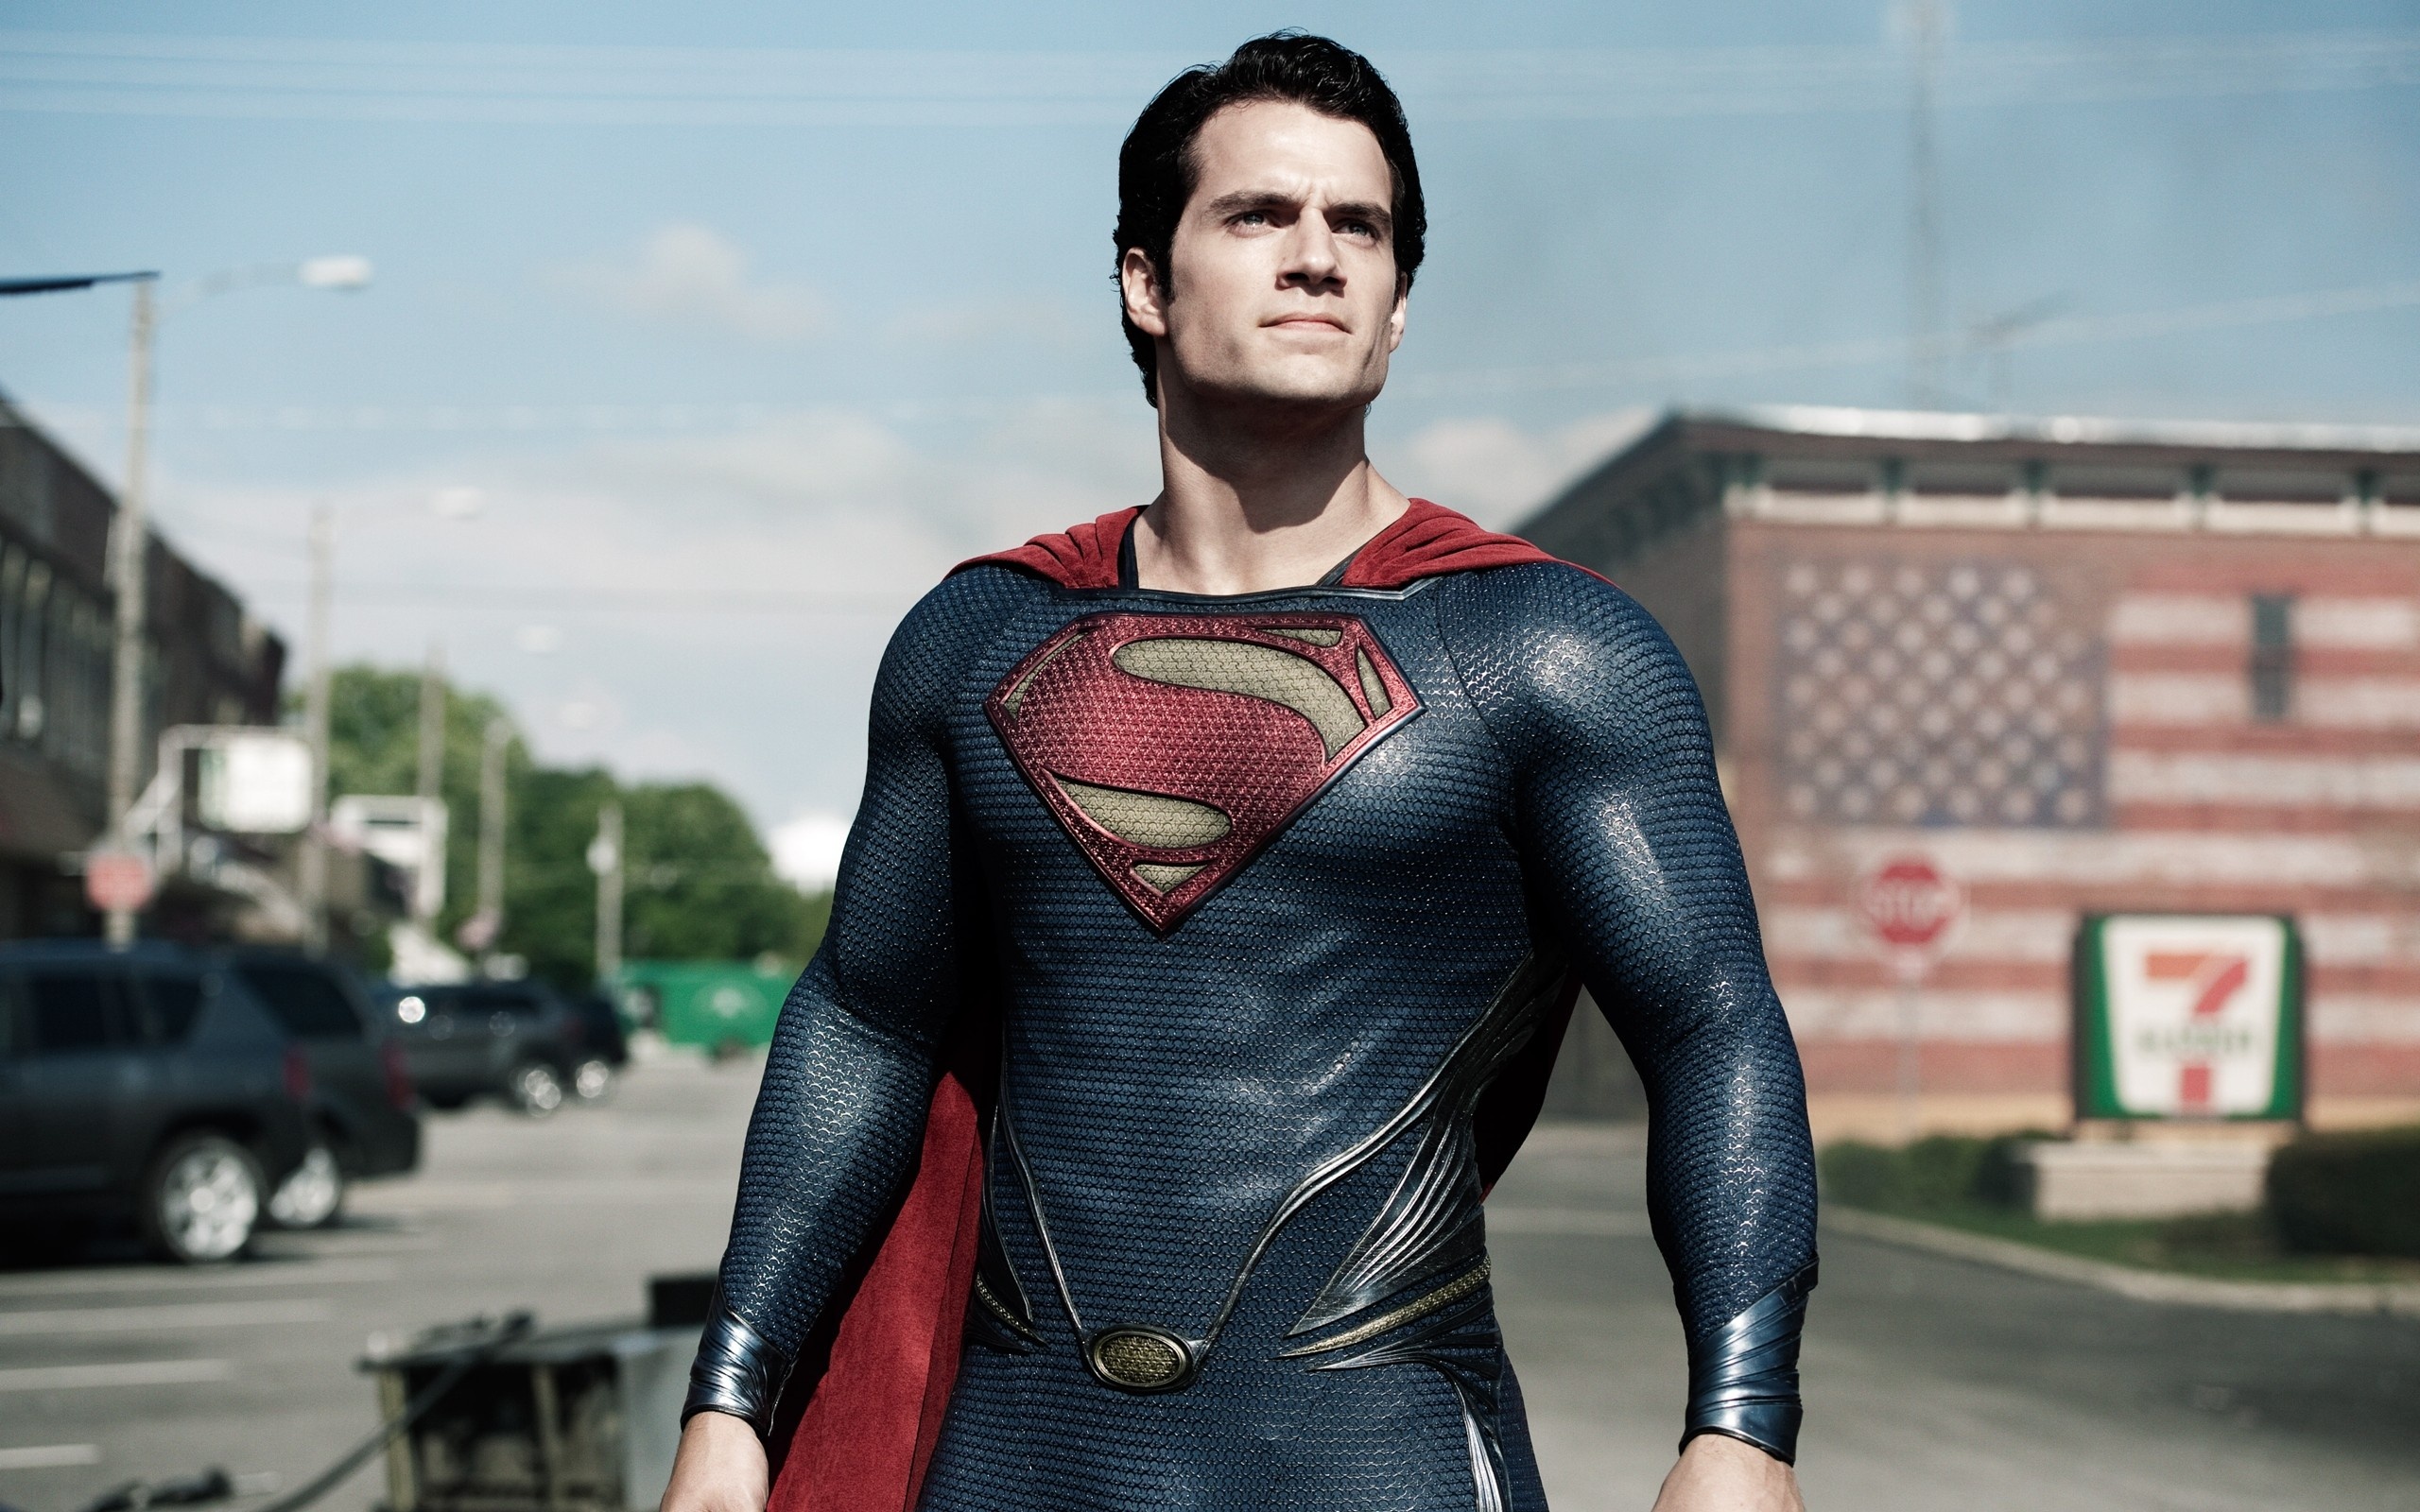 Henry Cavill HD wallpapers, Background images, 2560x1600 HD Desktop